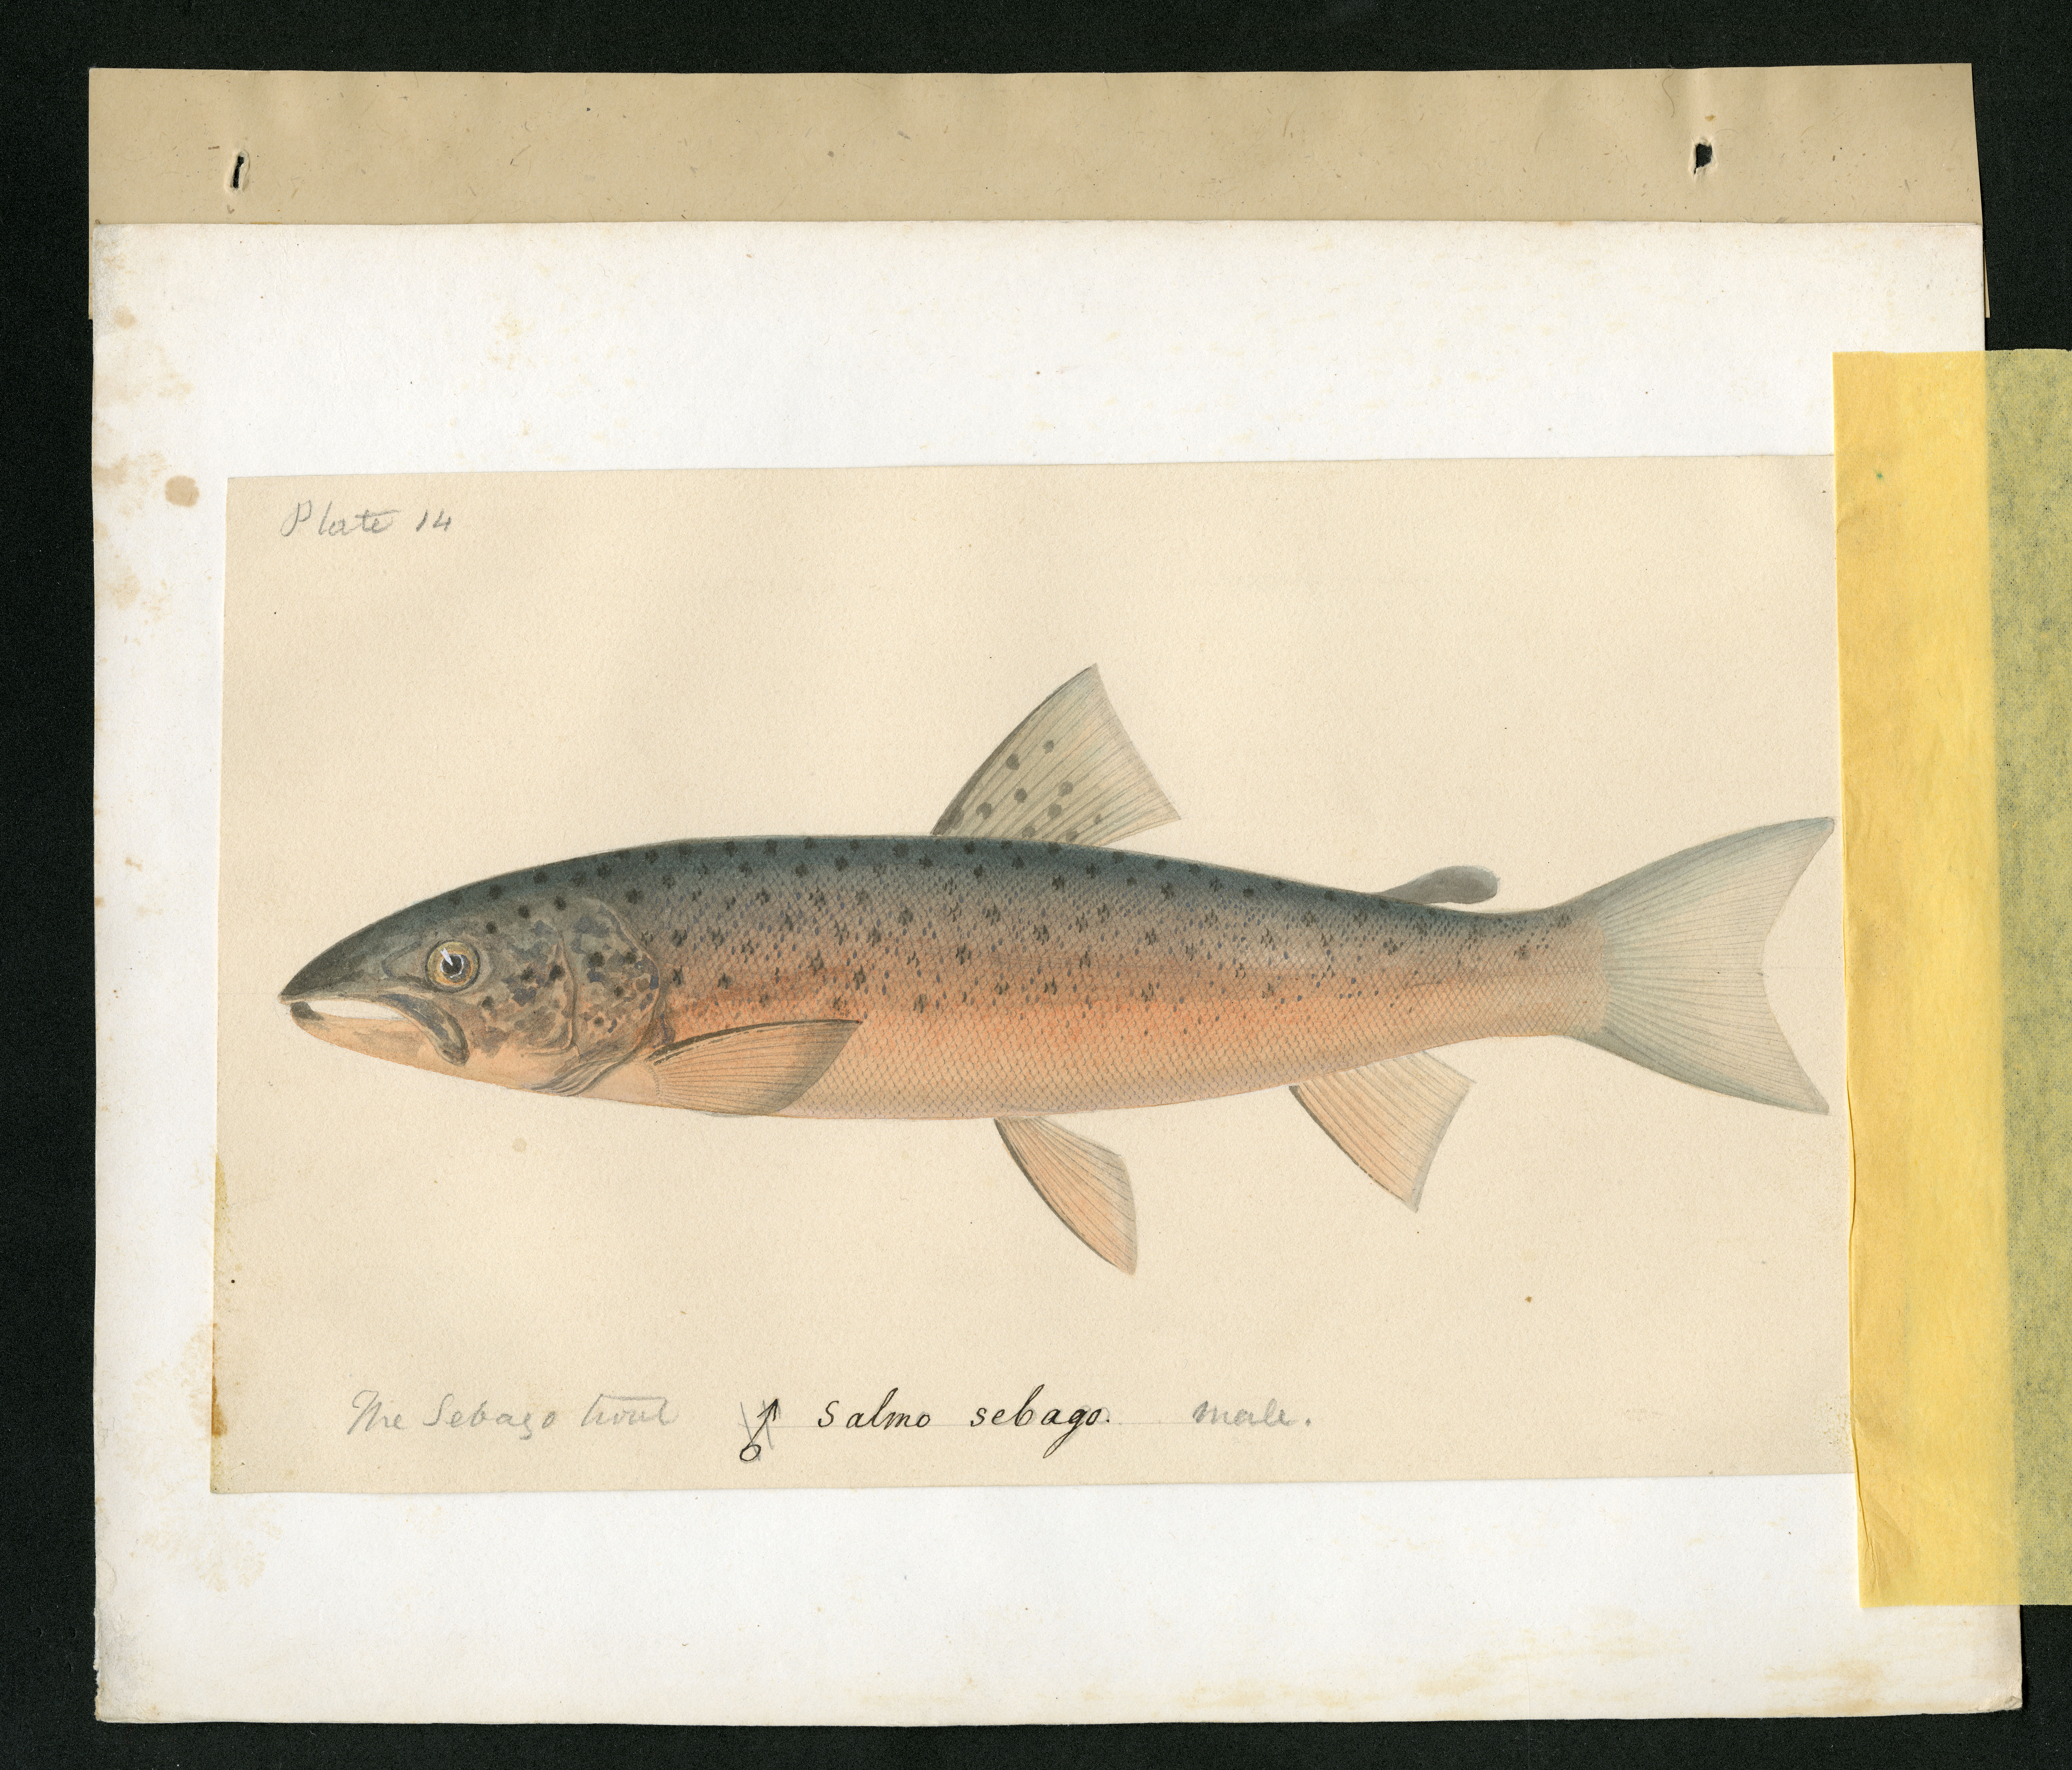 Report on Salmonidae by George Suckley, Plate No. 14, 1857-1861; Drawing